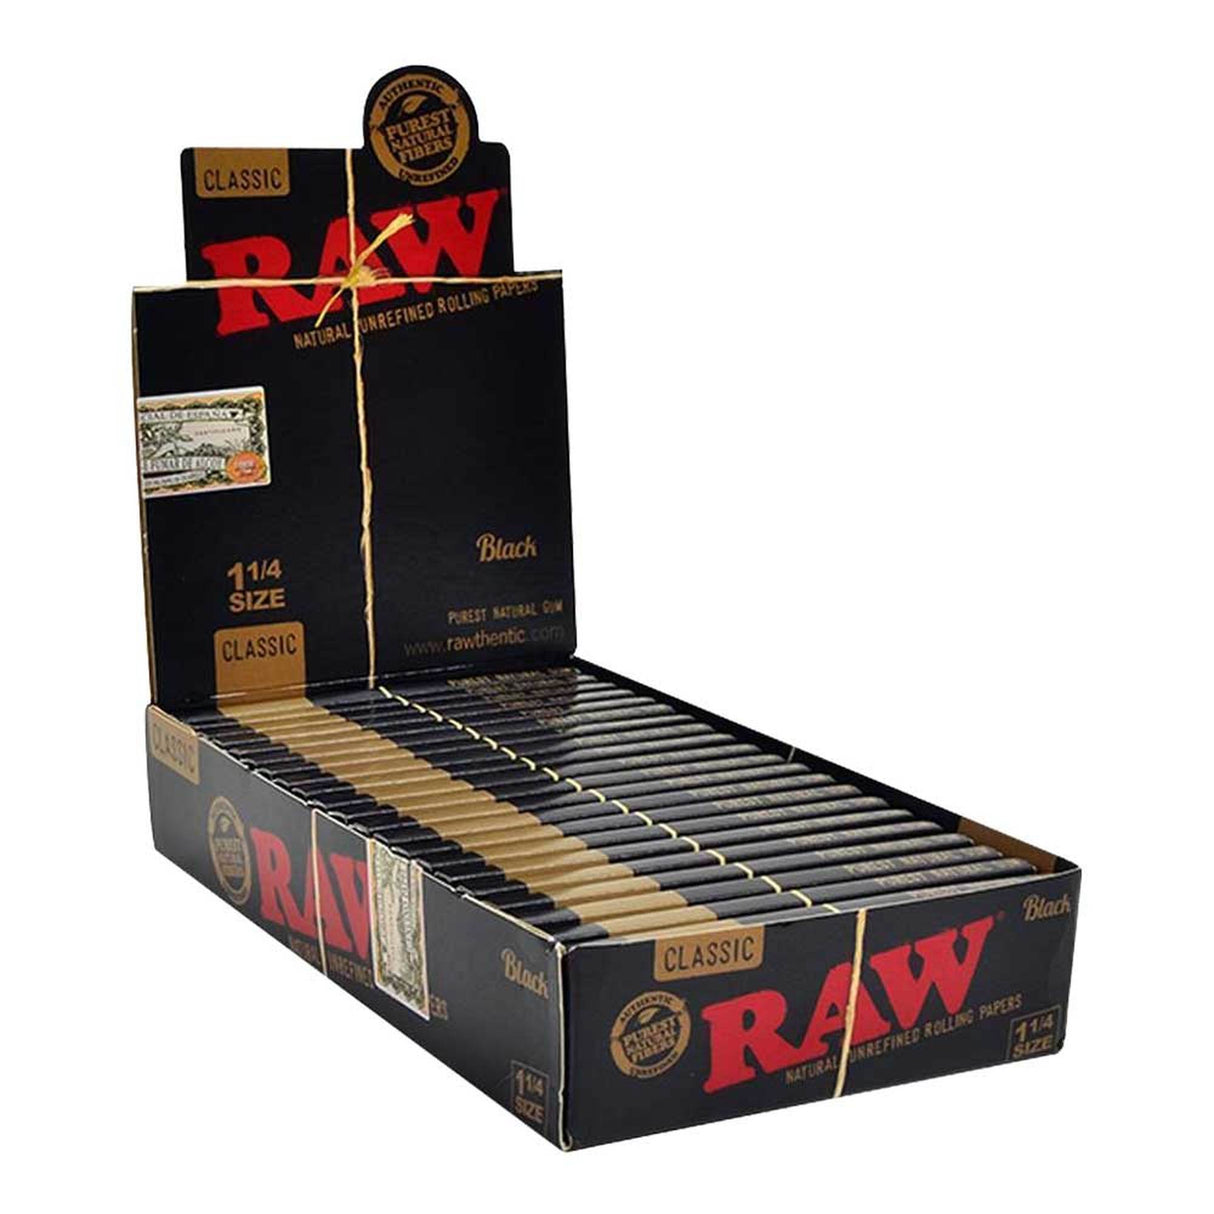 Raw Black 1.25 1 1/4 Size Rolling Papers Full - Box of 24 Pack